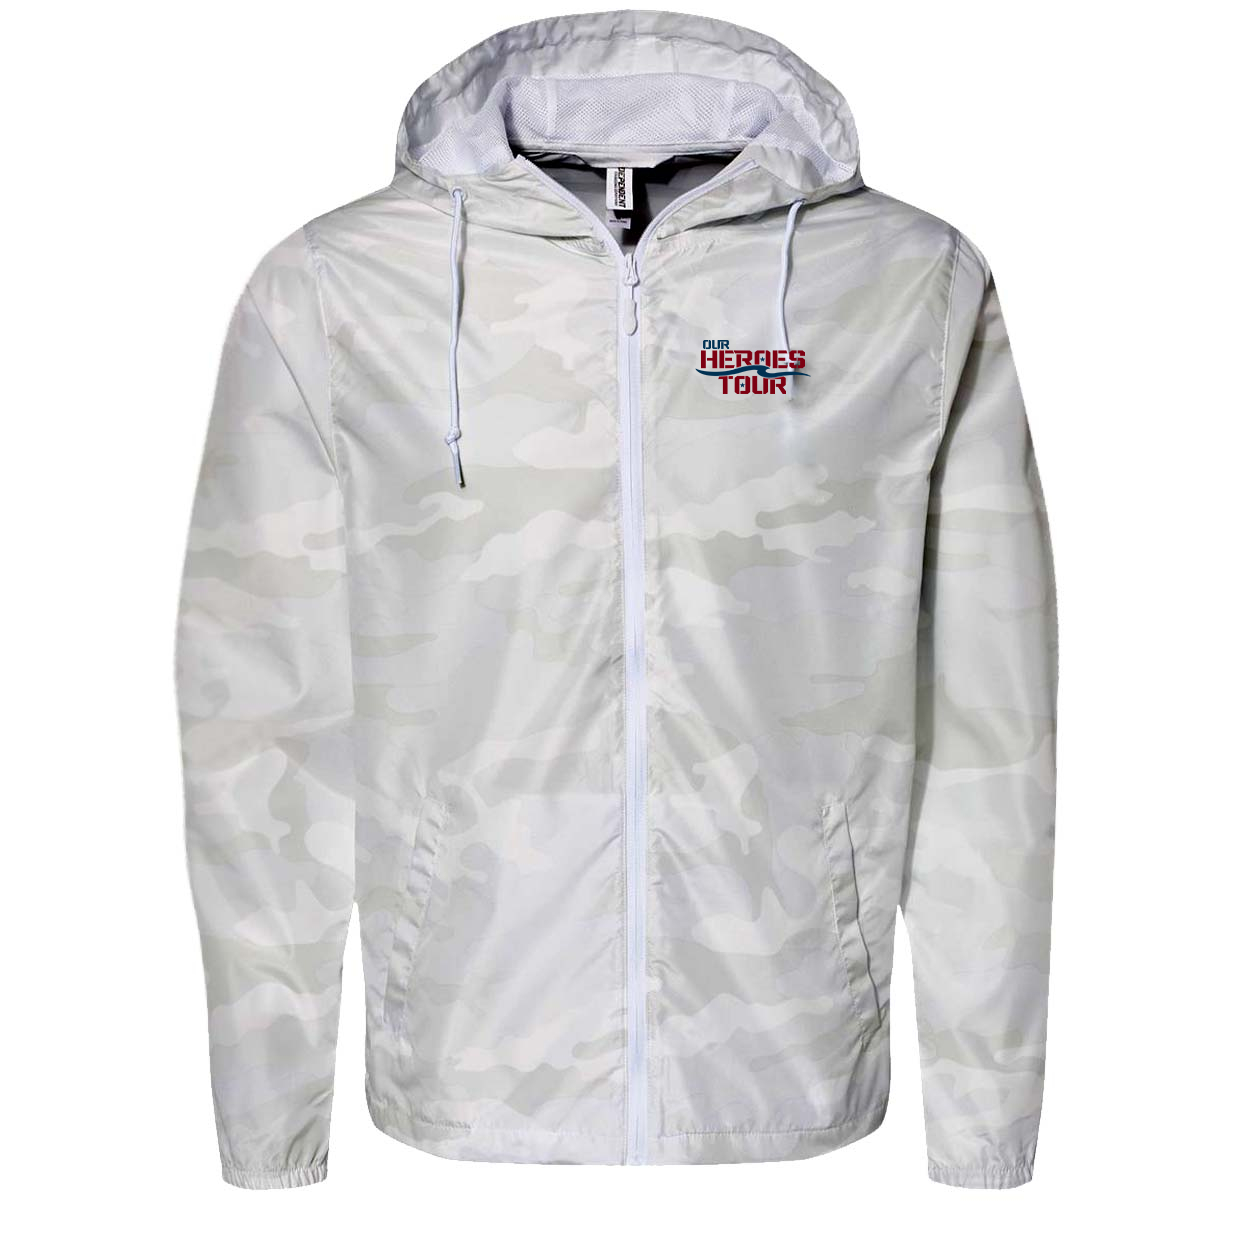 Our Heroes Tour Night Out Lightweight Windbreaker White Camo